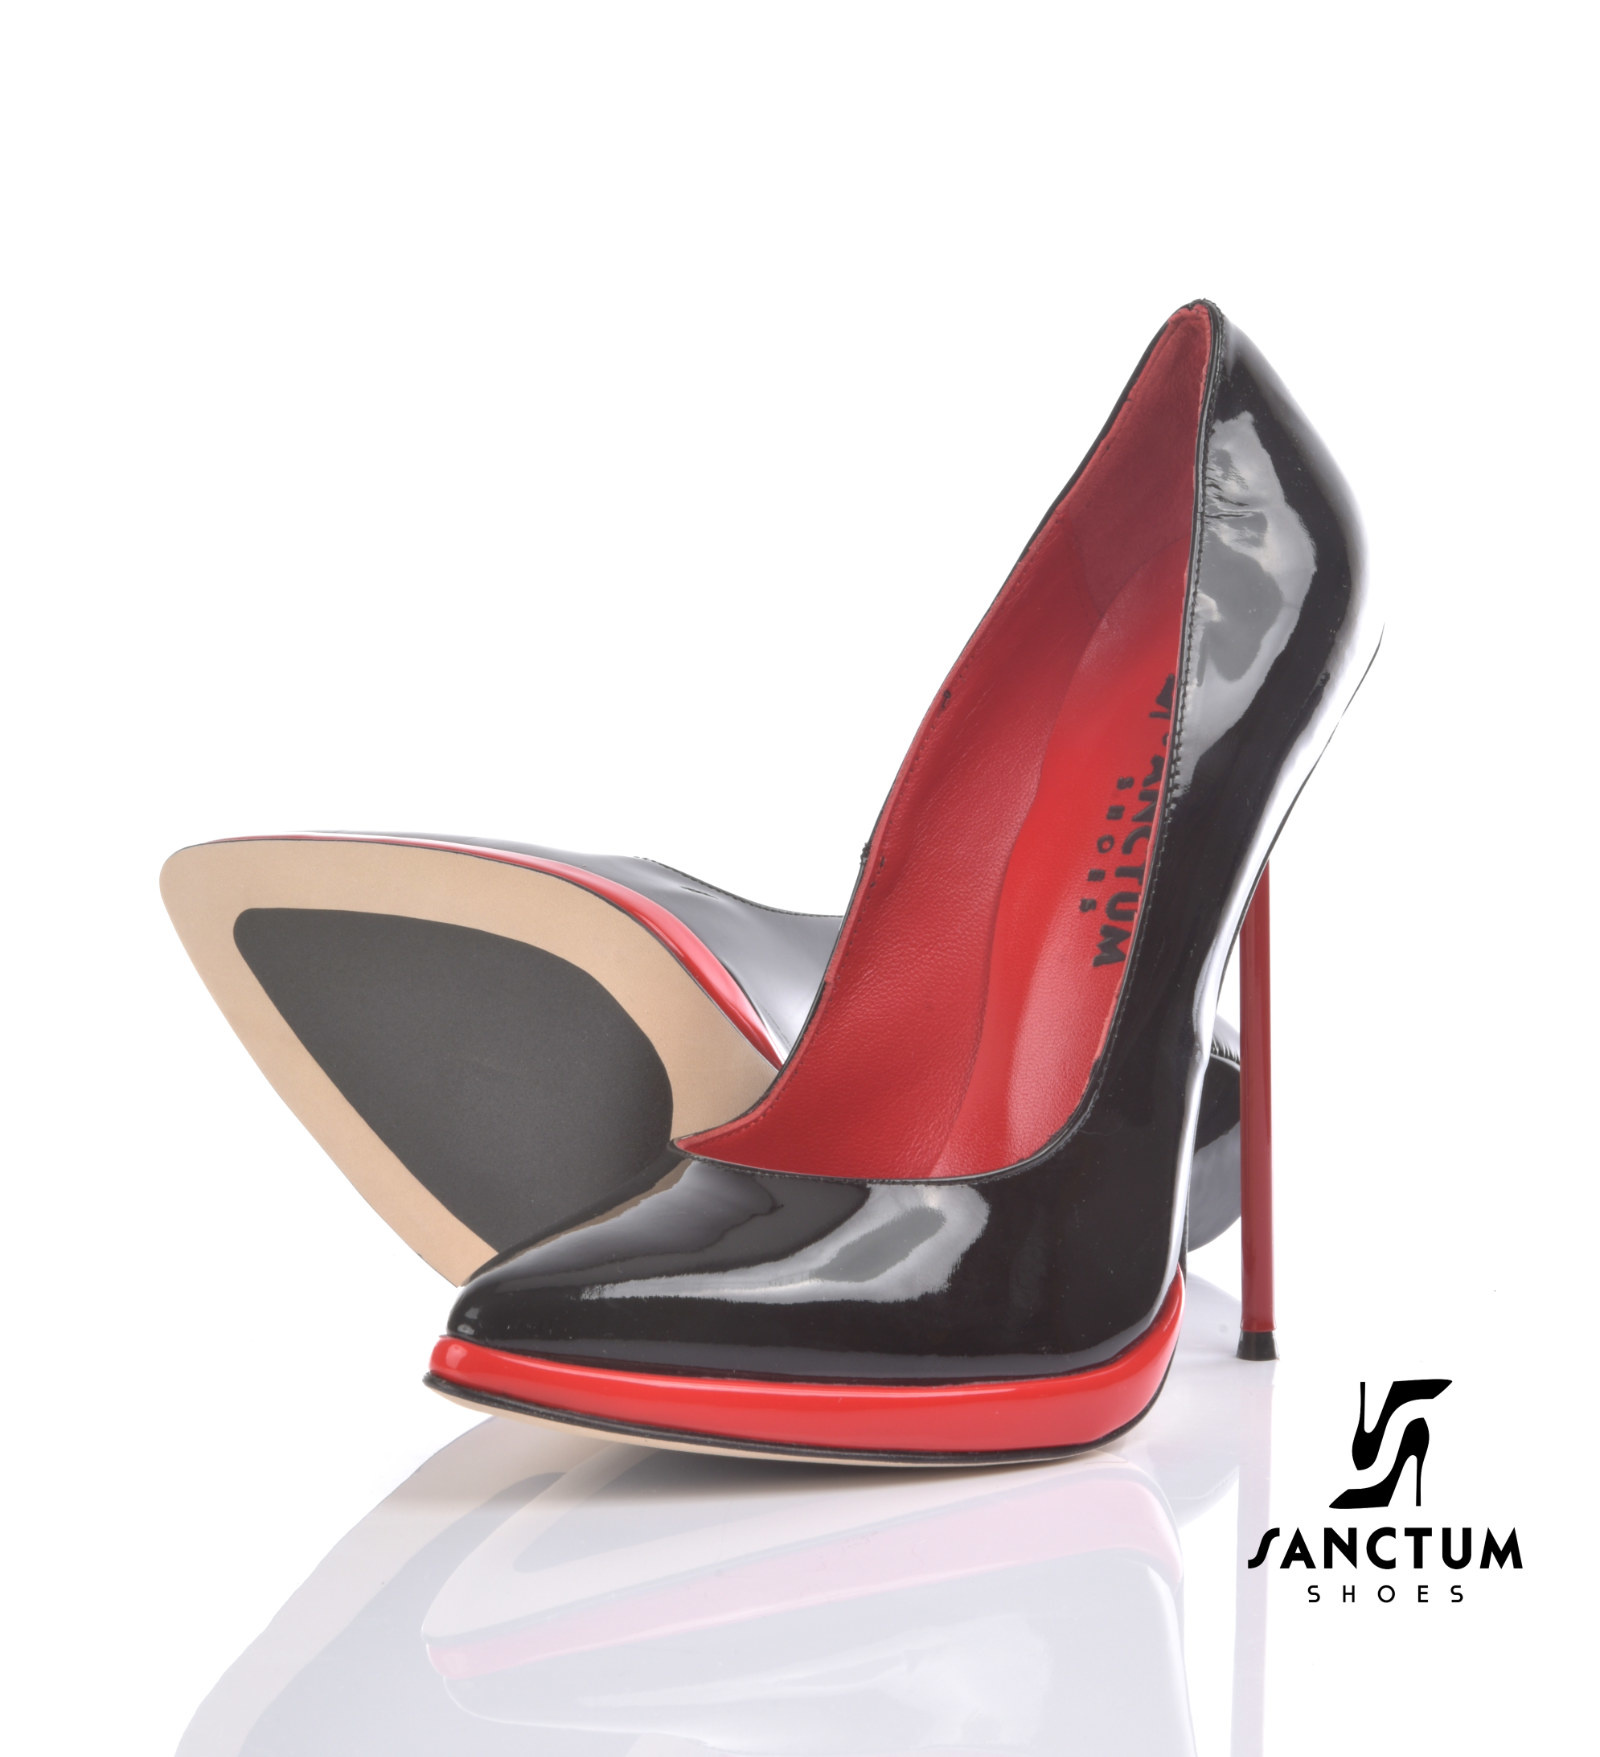 Extreme high Italian pumps PHOEBE with metal heels - Italian High Heels by Sanctum Shoes